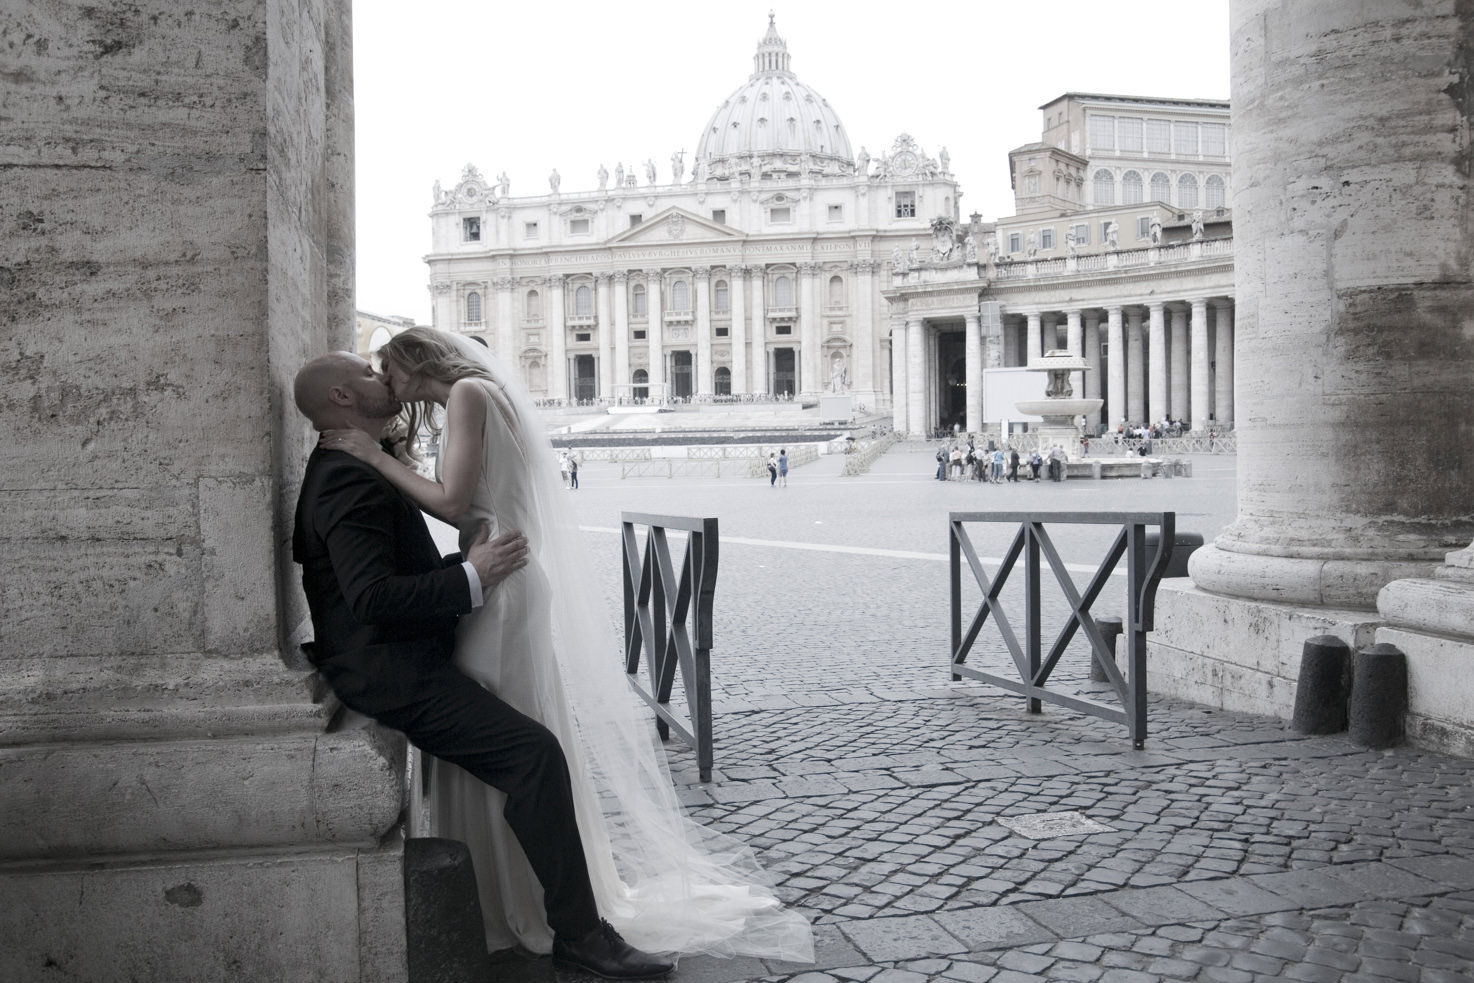 Dating while married in Rome